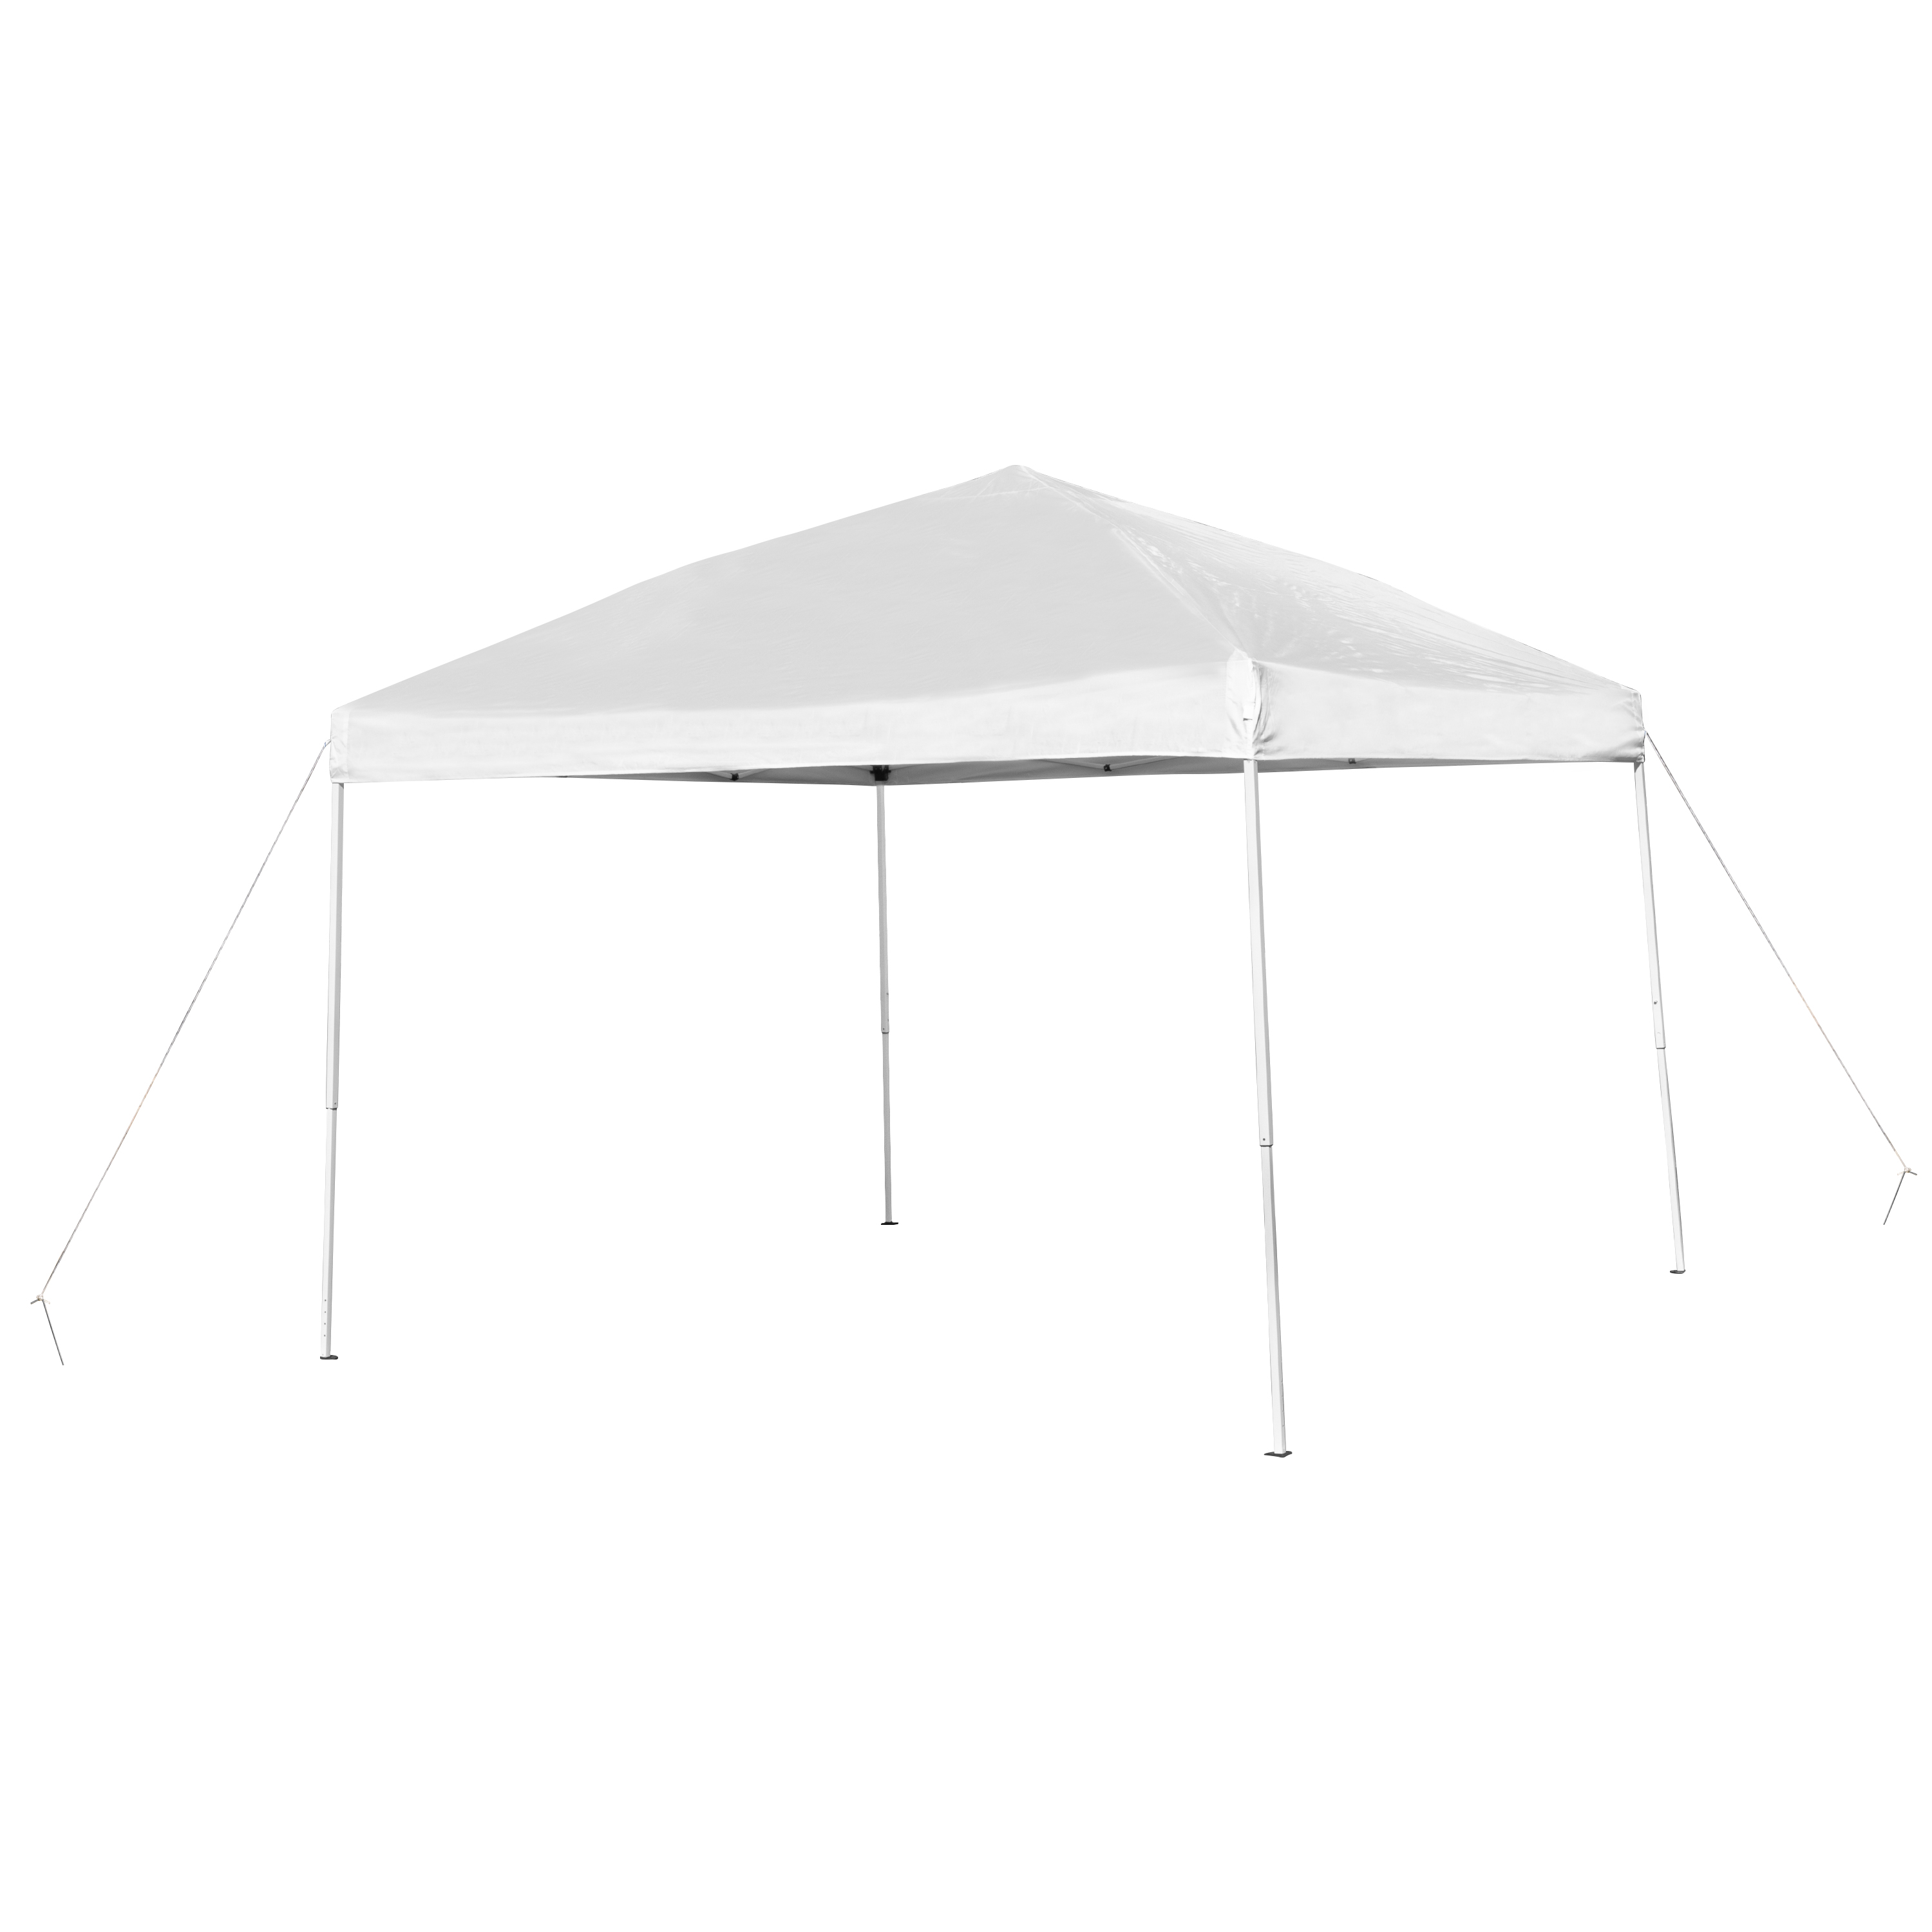 Flash Furniture JJ-GZ1010-WH-GG 10' x 10' White Outdoor Pop Up Slanted Leg Canopy Tent with Carry Bag